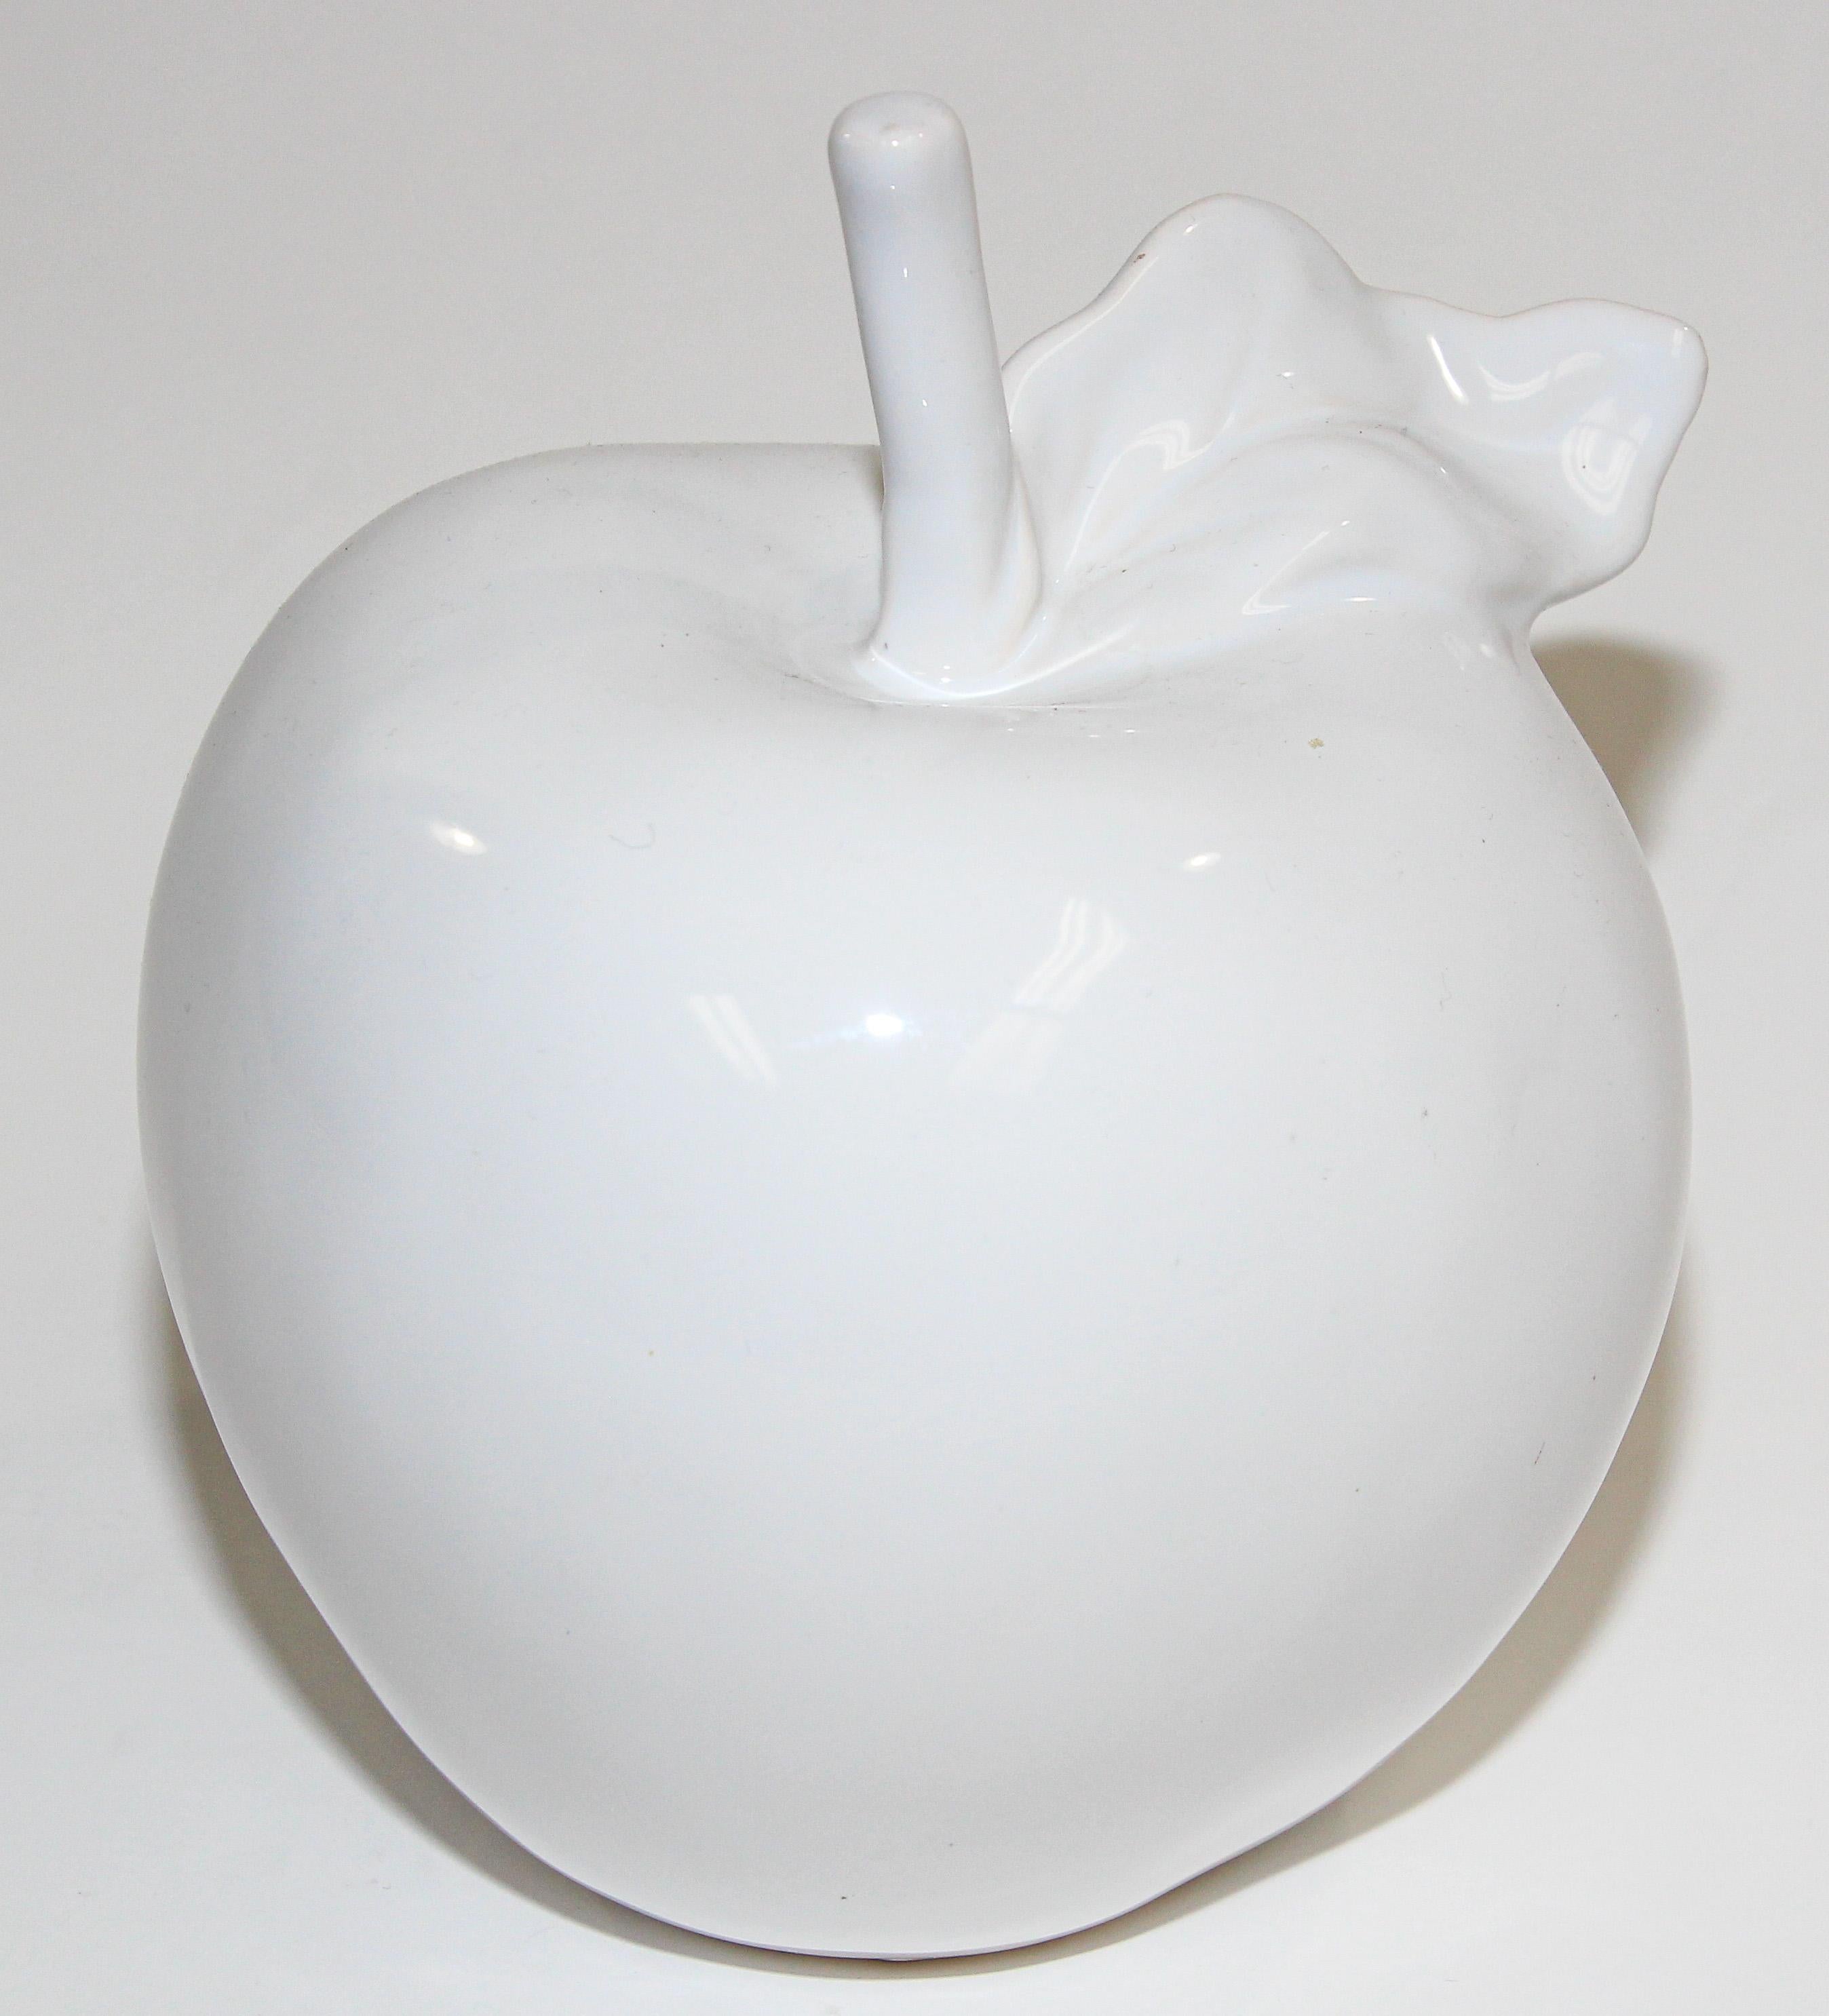 Hand-Crafted Organic Modern White Porcelain Minimalist Apple Sculpture For Sale